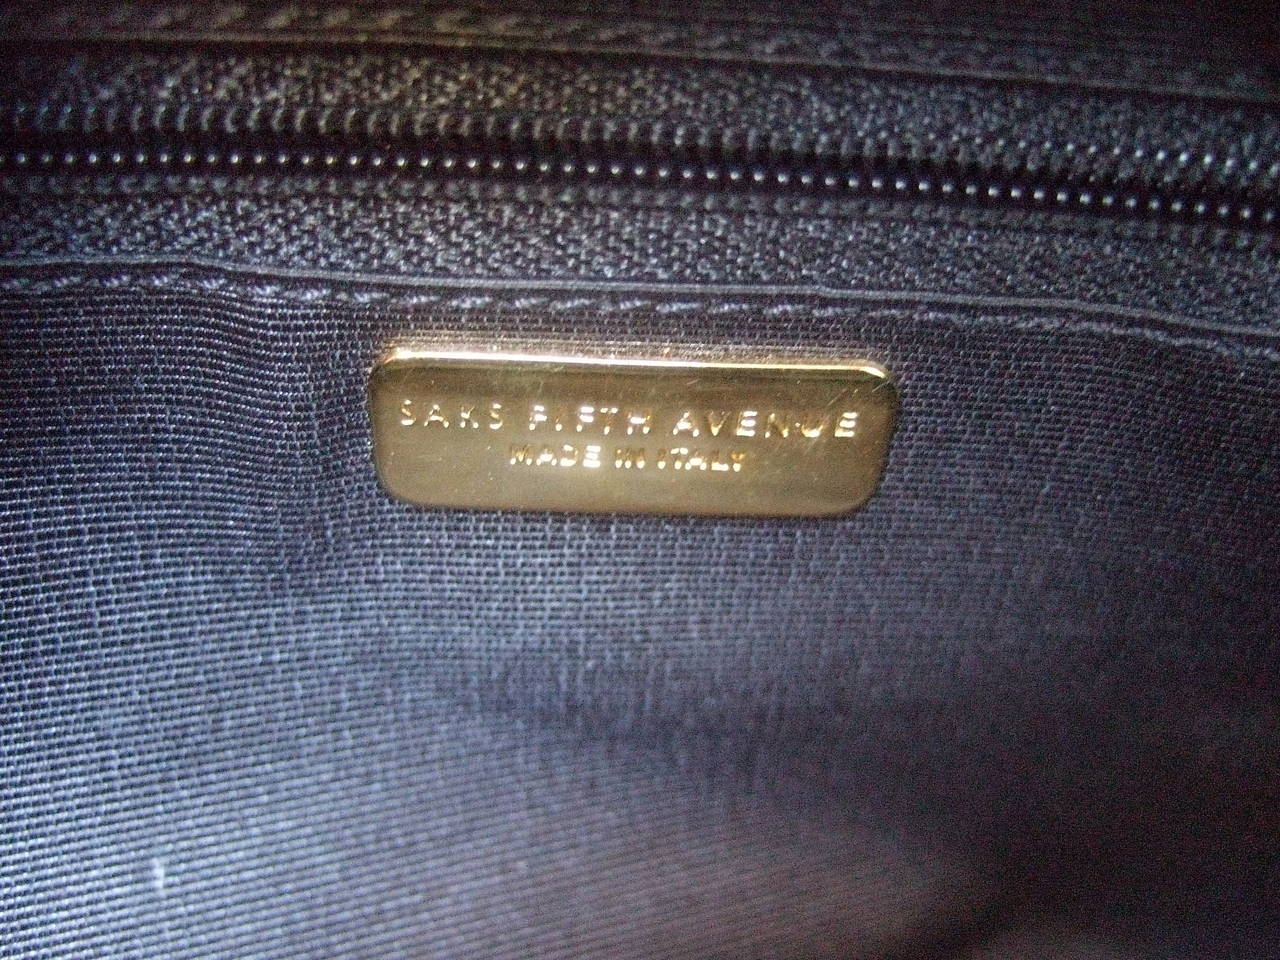 Saks Fifth Avenue Striped Velvet Handbag Made in Italy In Excellent Condition For Sale In University City, MO